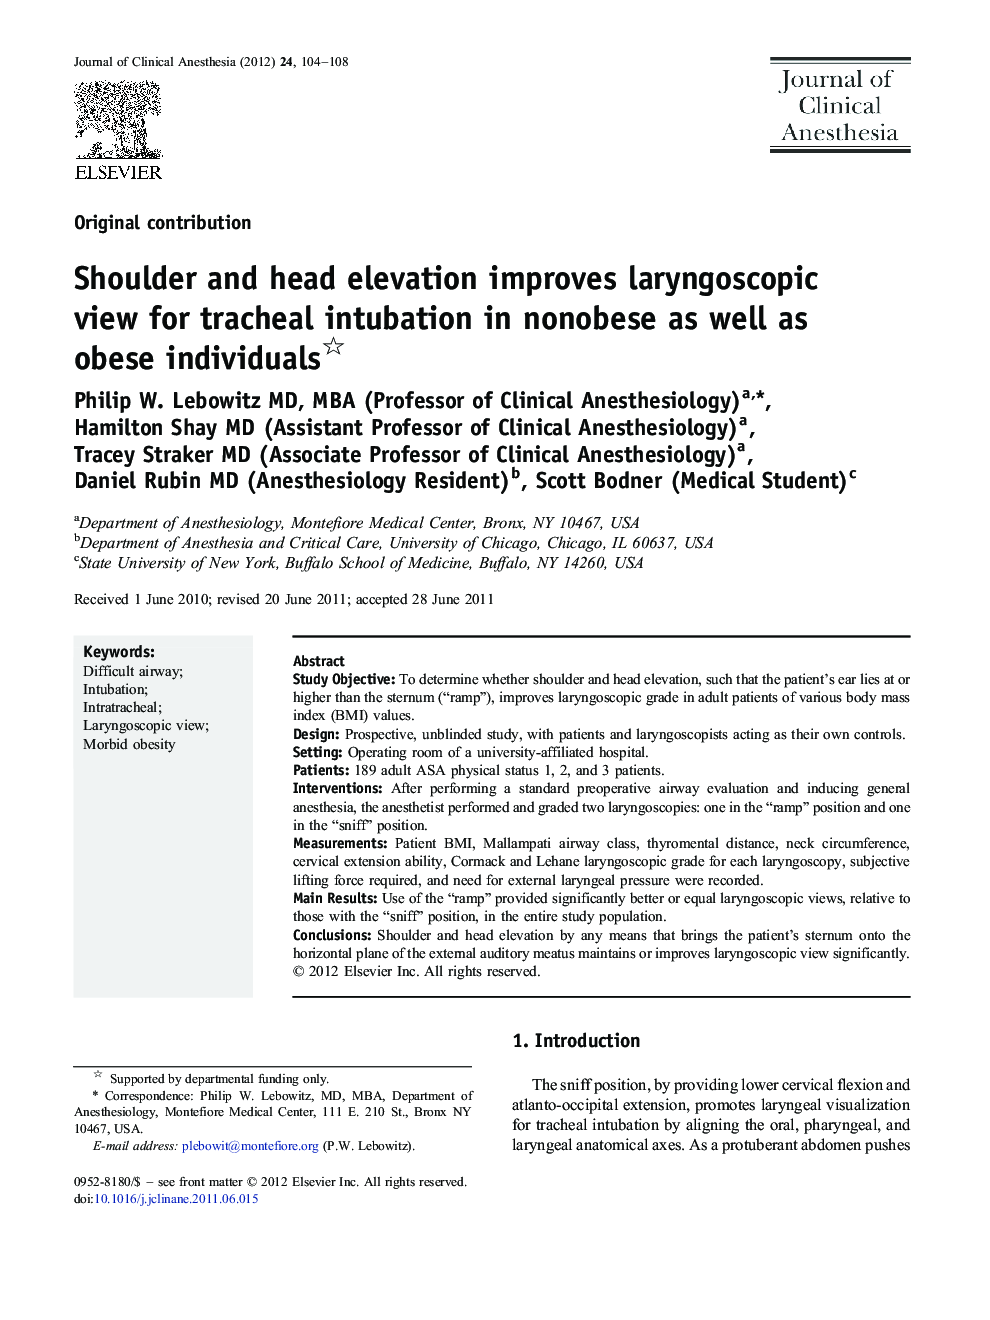 Shoulder and head elevation improves laryngoscopic view for tracheal intubation in nonobese as well as obese individuals 